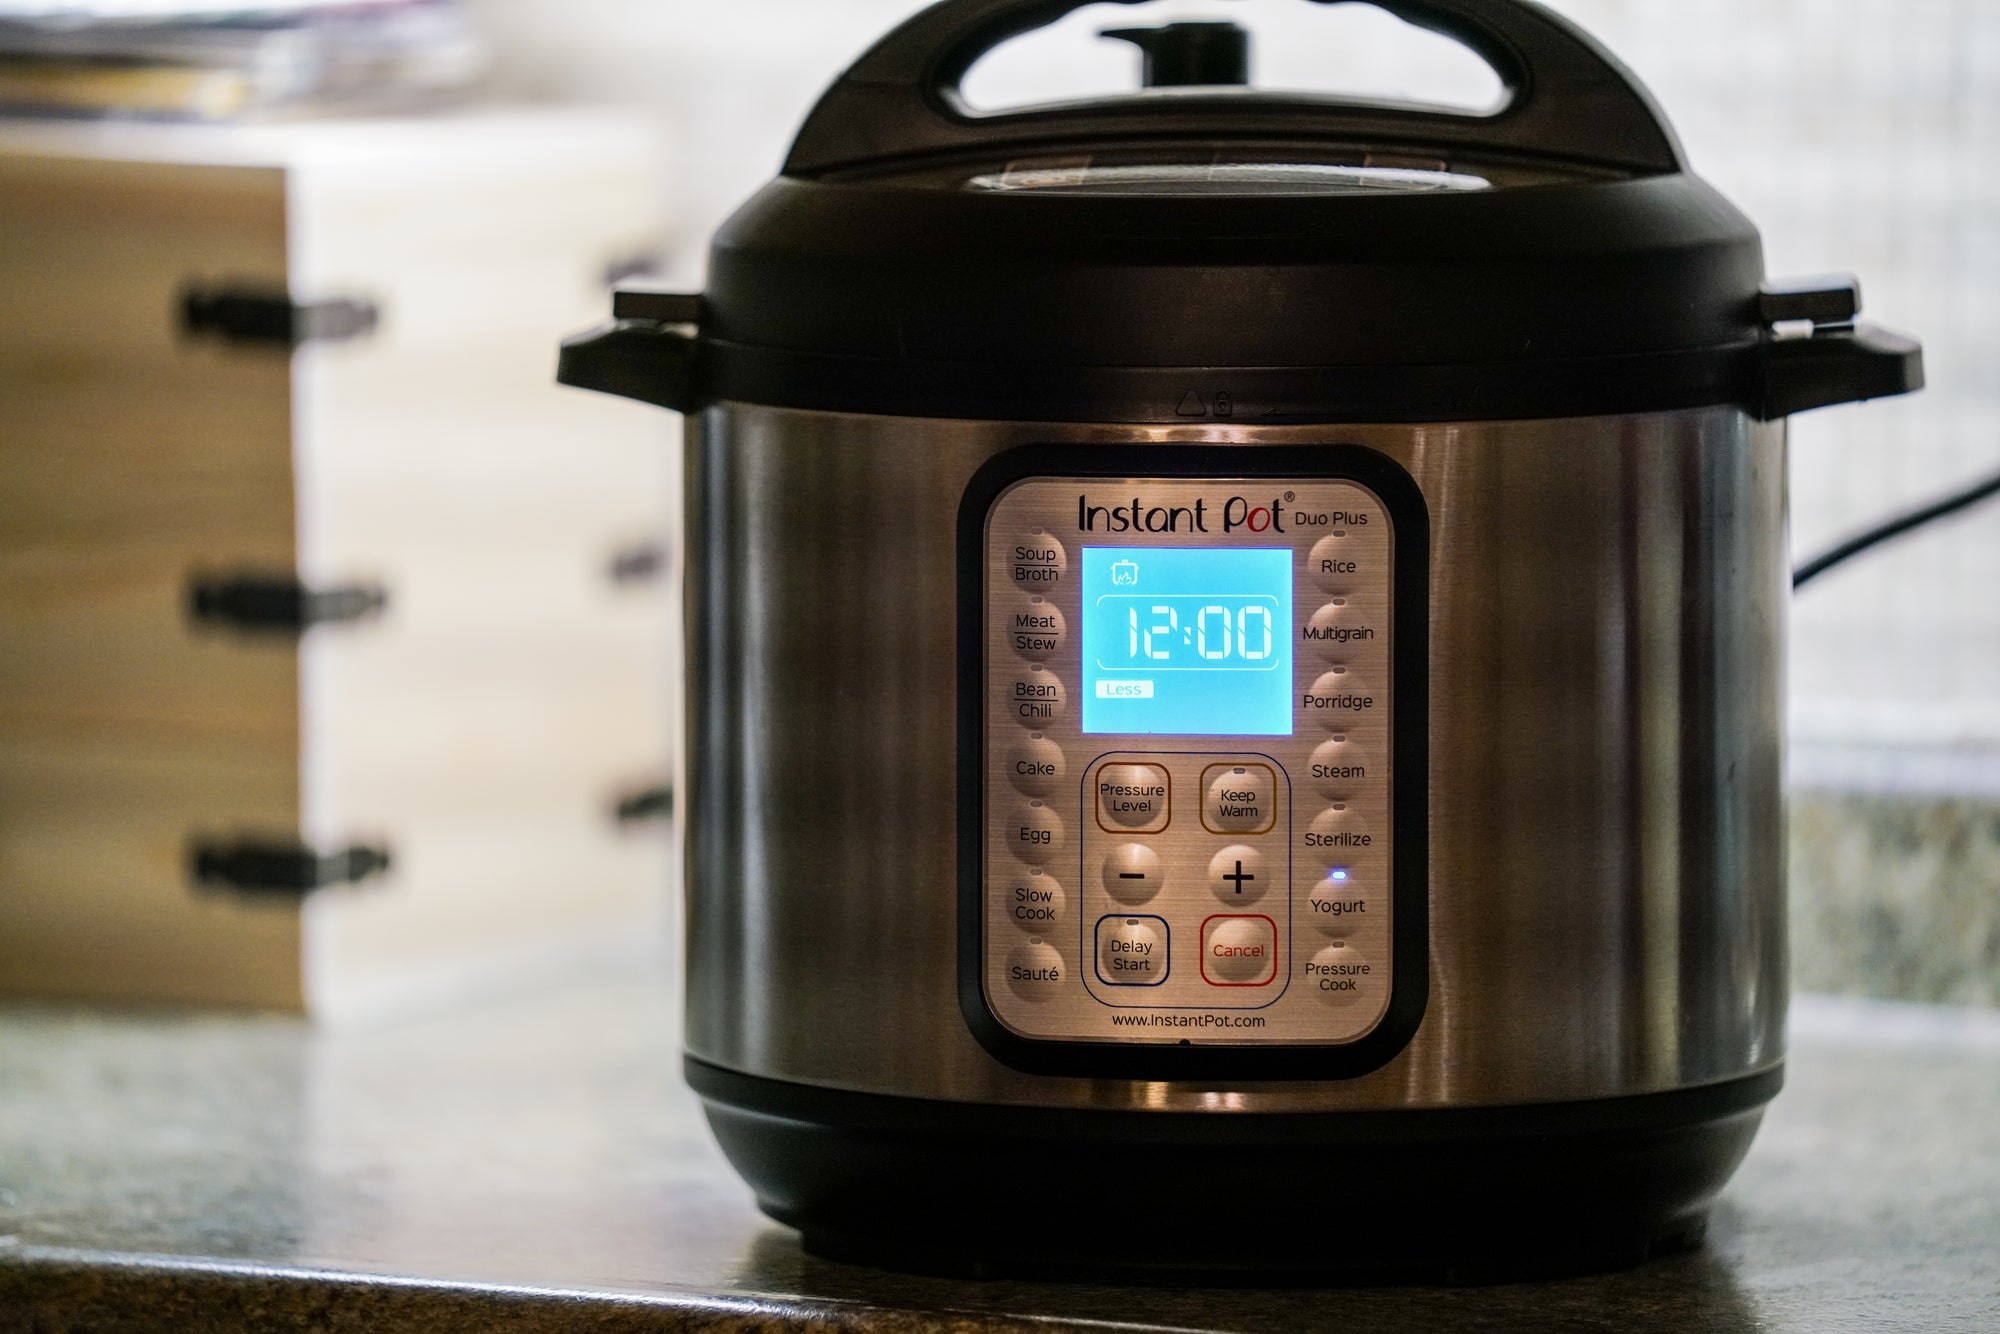 Instant Pot Ideas roasting pressure cook cooking 100% grass fed and finished recipe recipes fast quick easy meal nourishing meat Northstar bison pasture raised regenerative pork elk beef goat lamb chicken soy-free corn-free